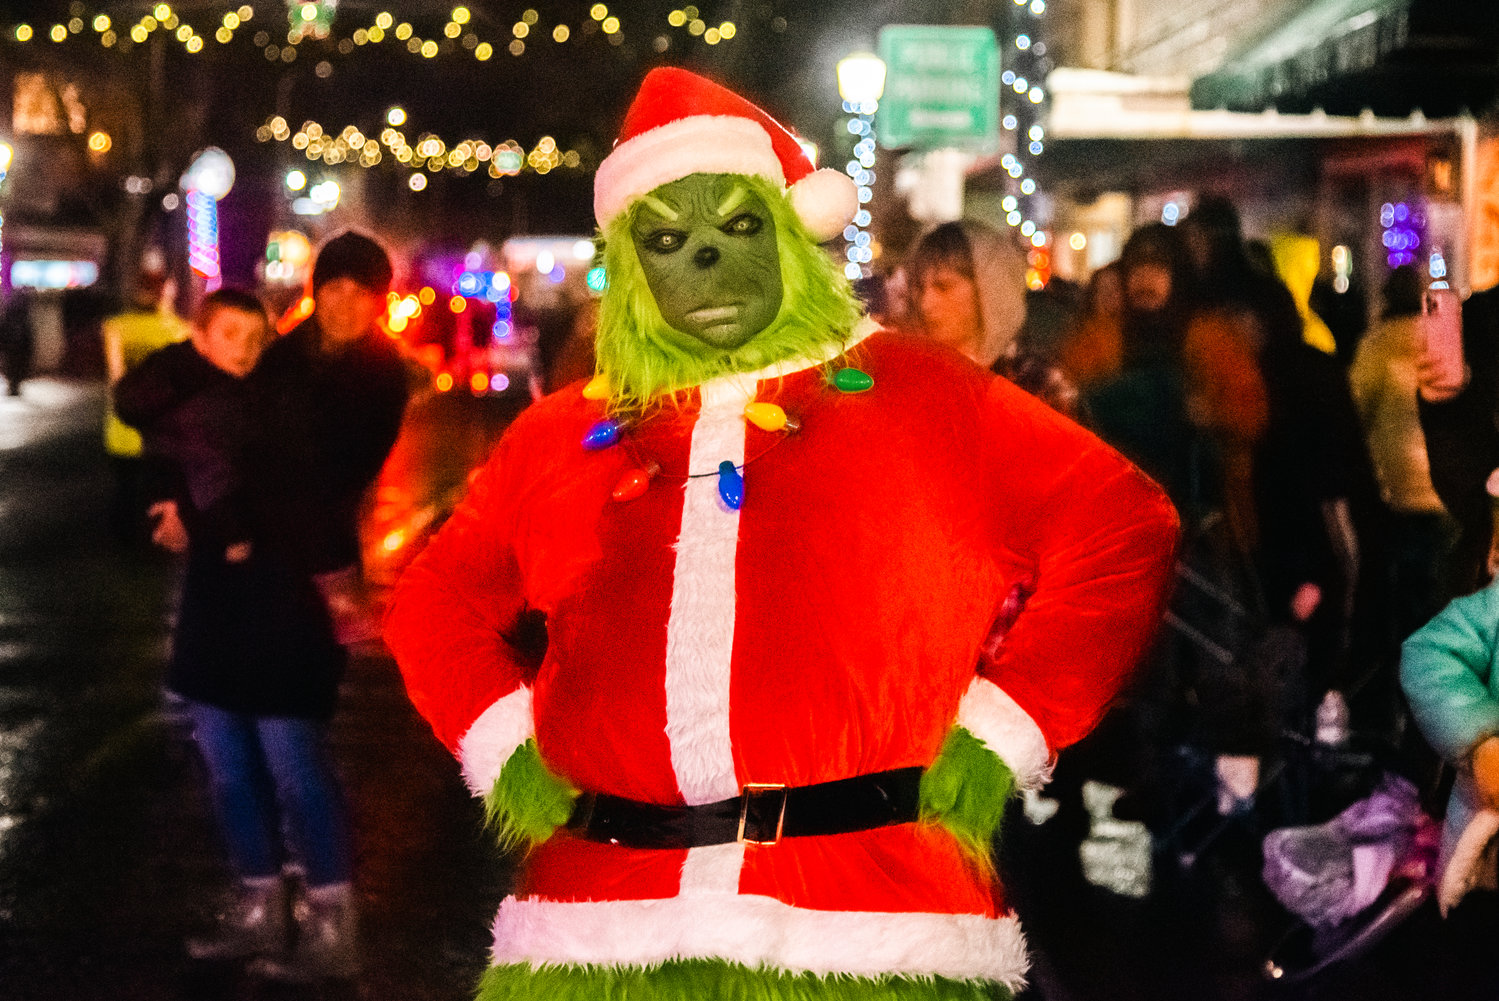 The grinch poses for a photo during the Lighted Tractor Parade in Centralia Saturday night.